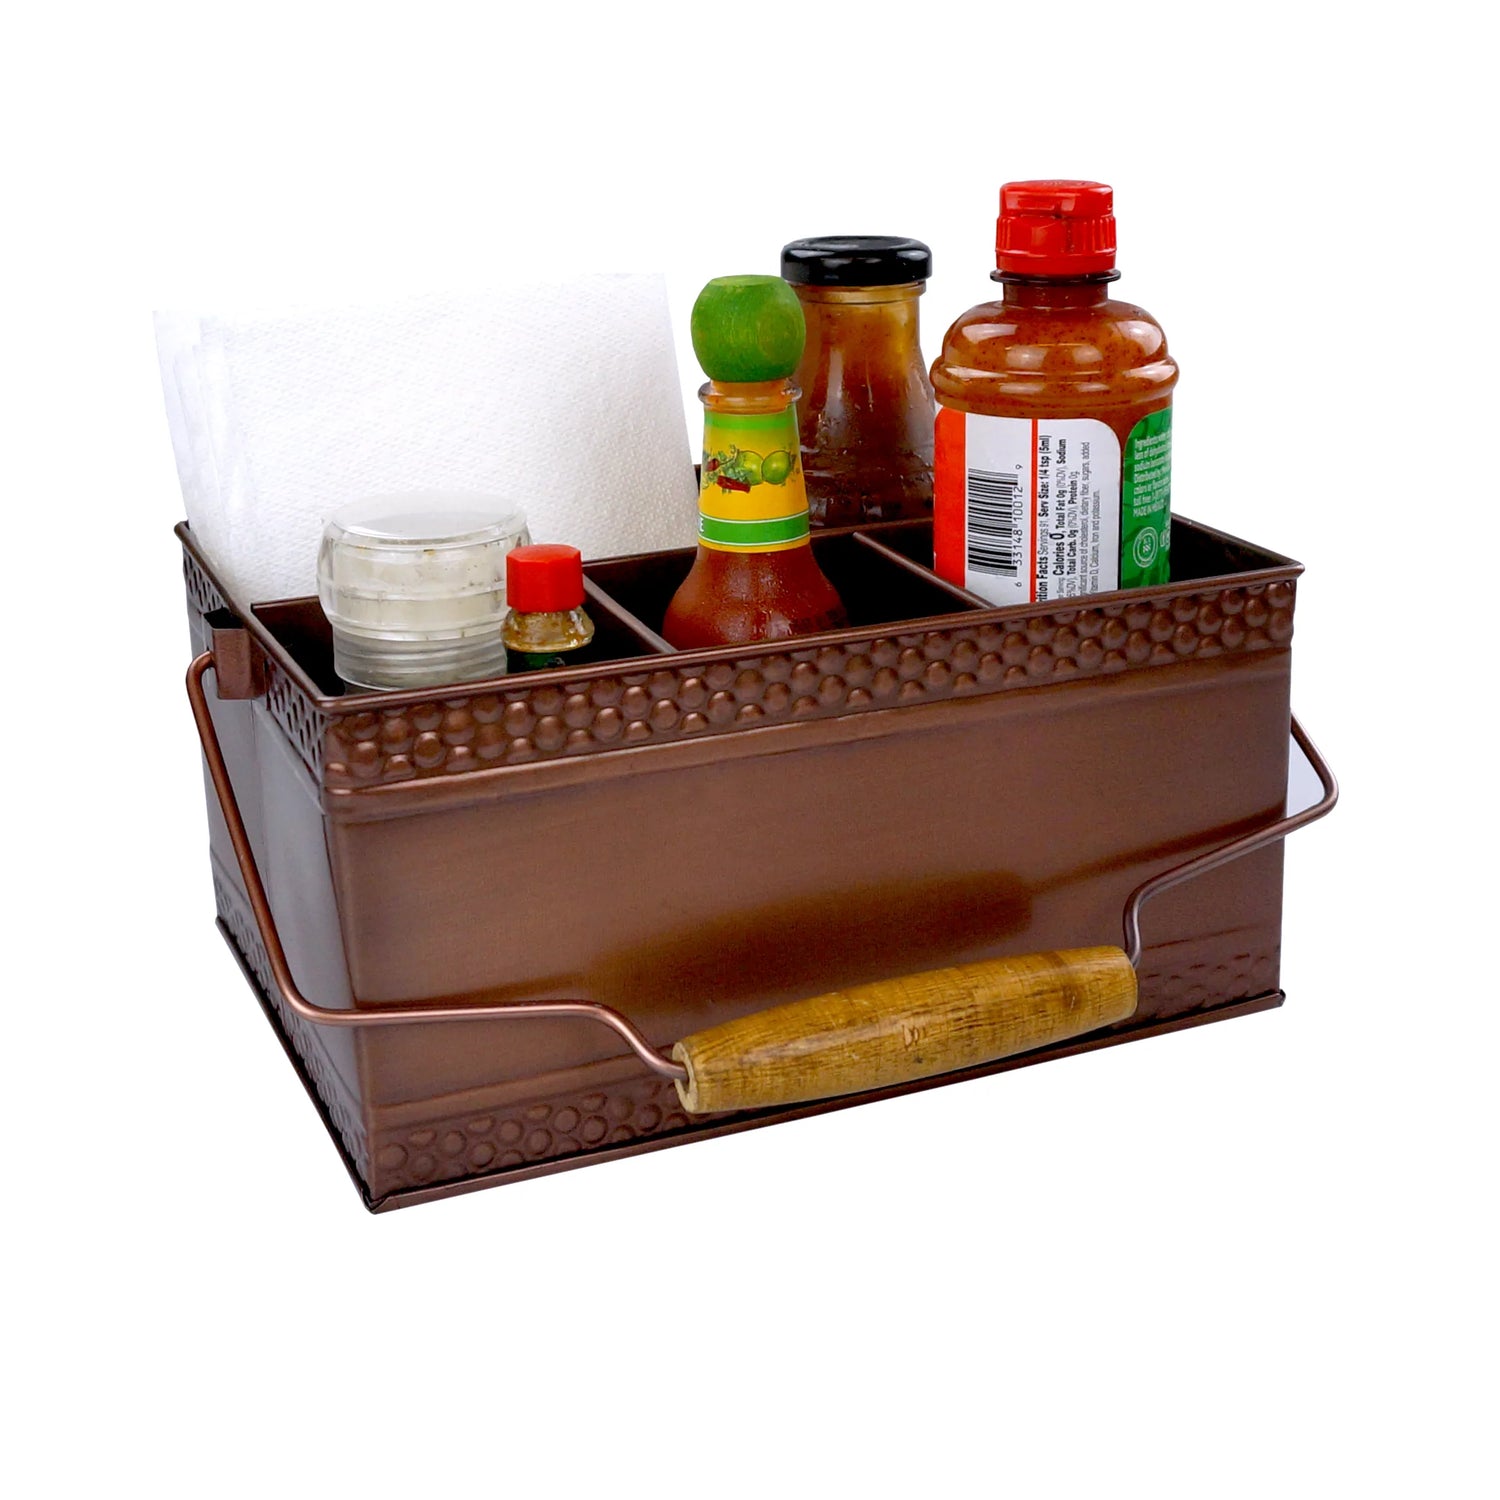 Aduro Snack & Go Vent Caddy with Condiment Tray – Aduro Products